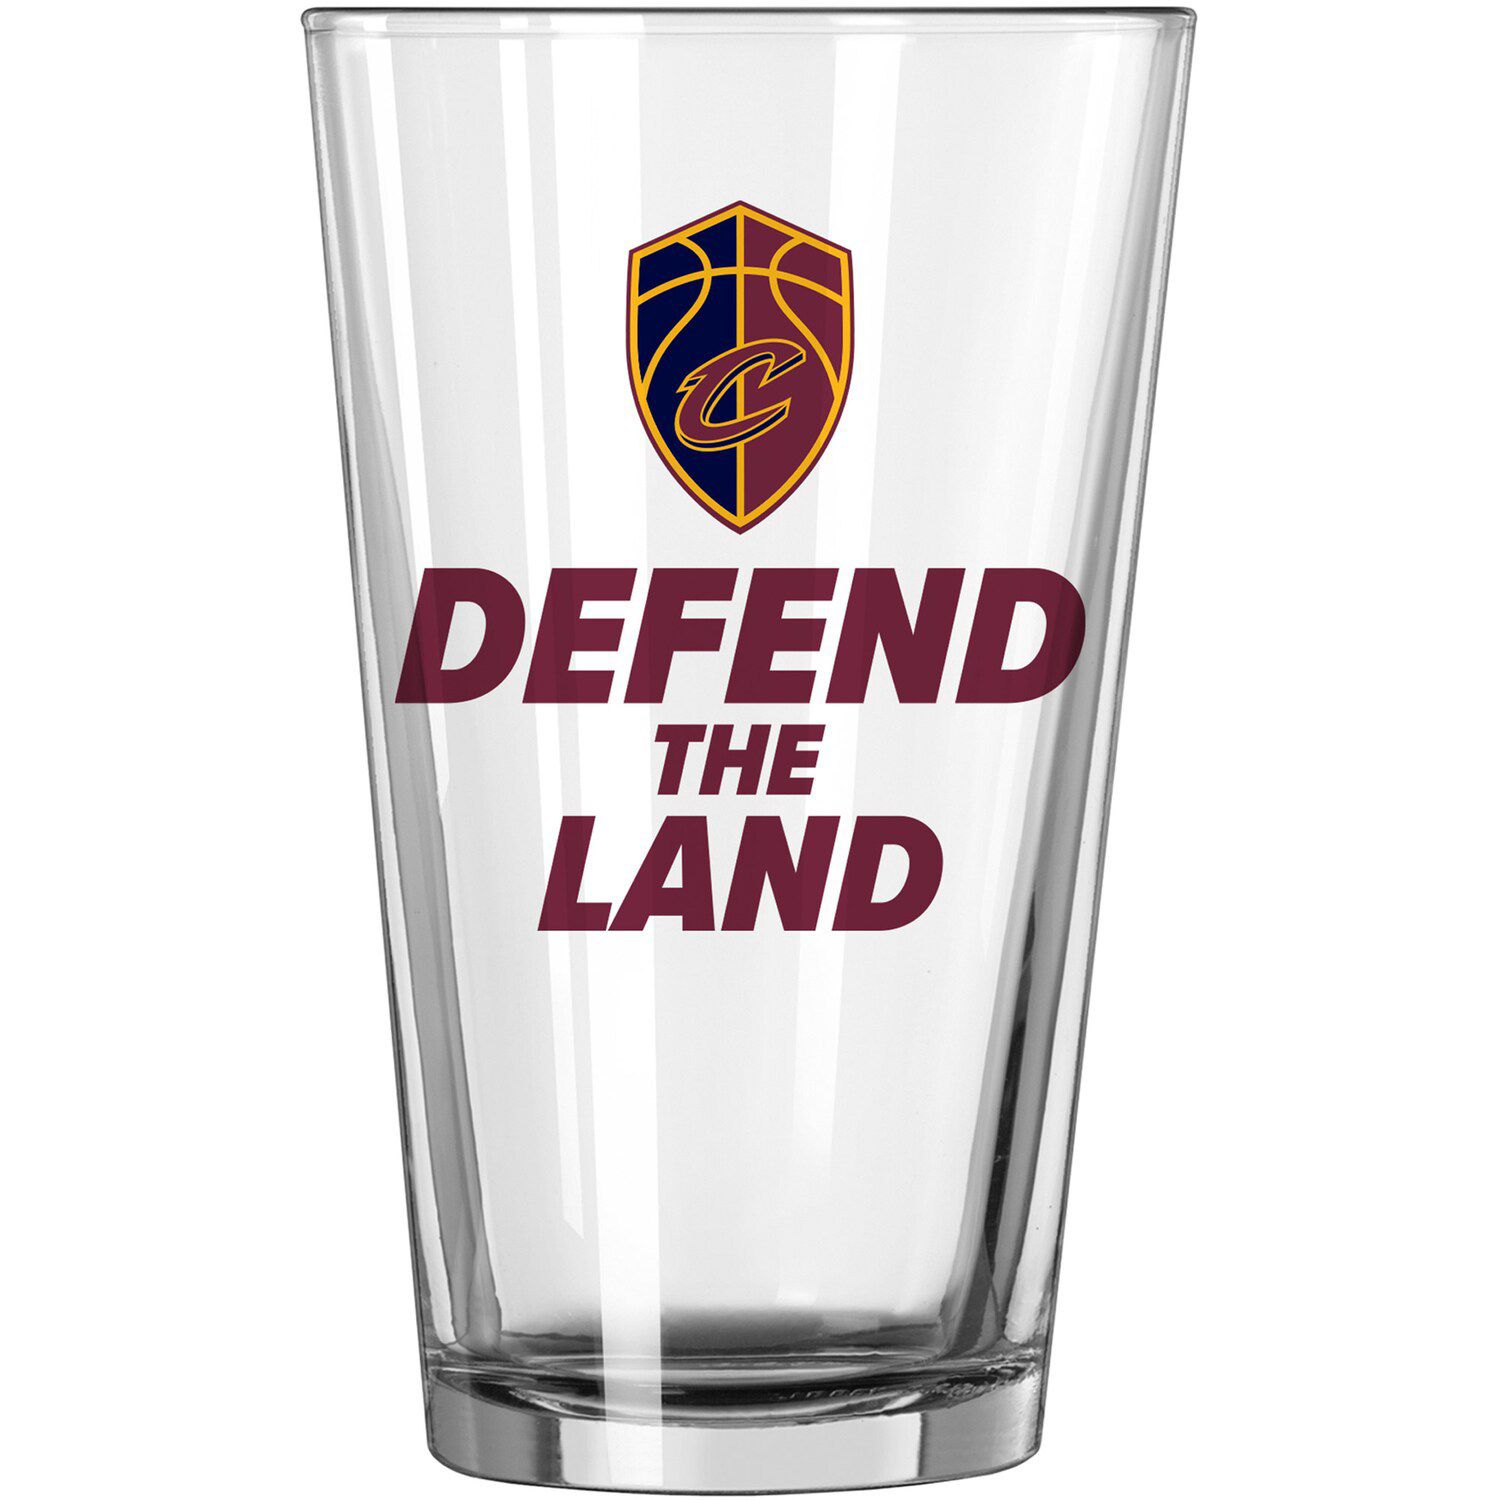 Image for Unbranded Cleveland Cavaliers 16oz. Team Slogan Pint Glass at Kohl's.